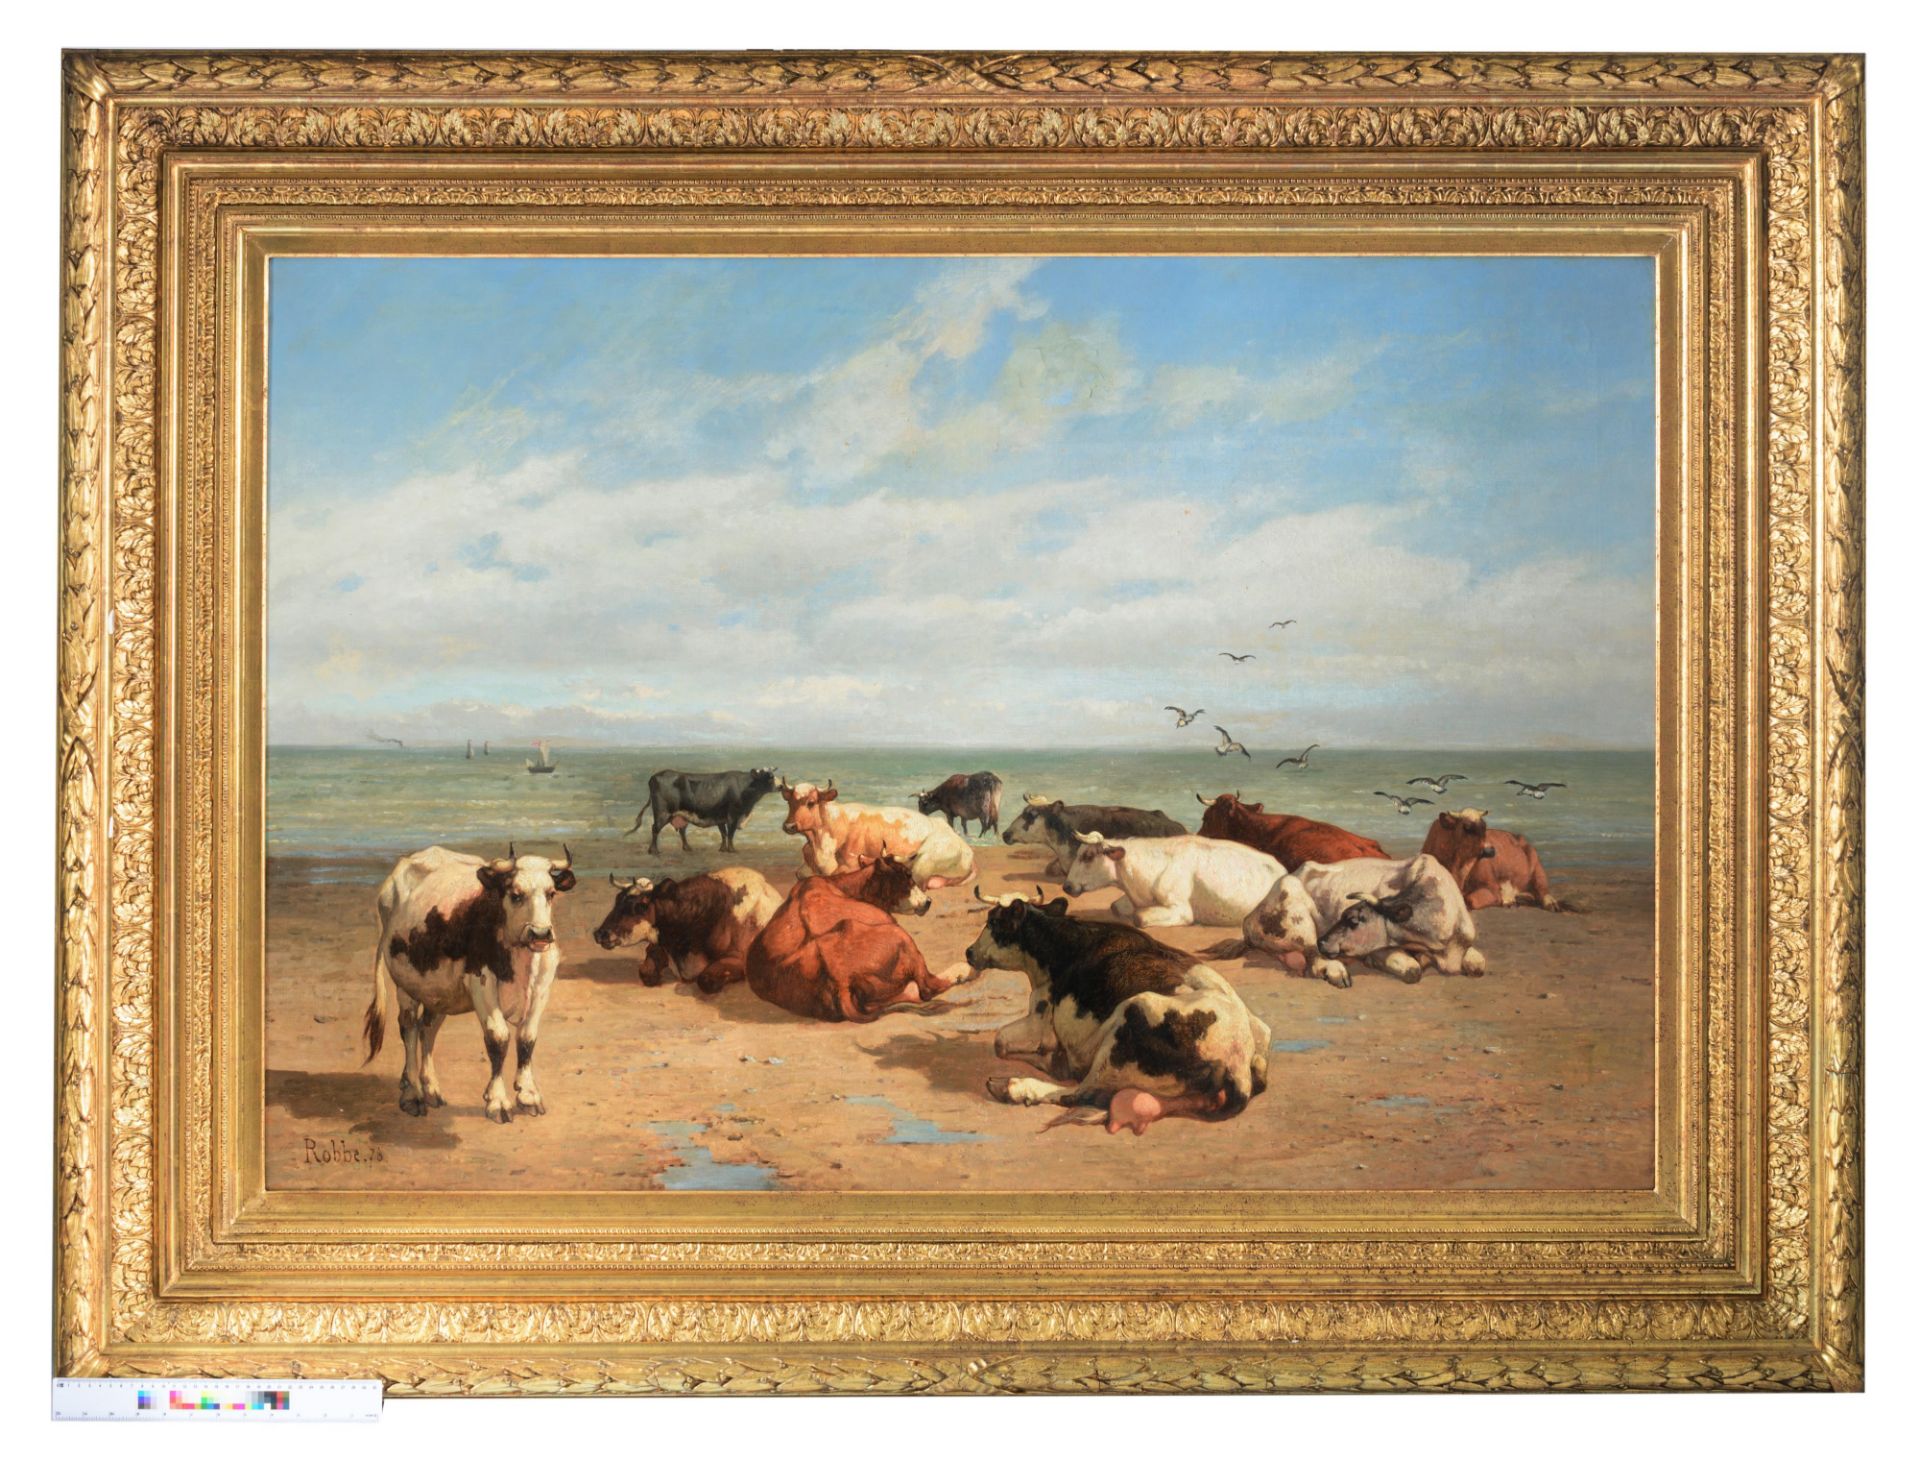 Robbe L. cows resting at the beach, dated (18)78, oil on canvas, 93 x 135 cm - Image 9 of 9